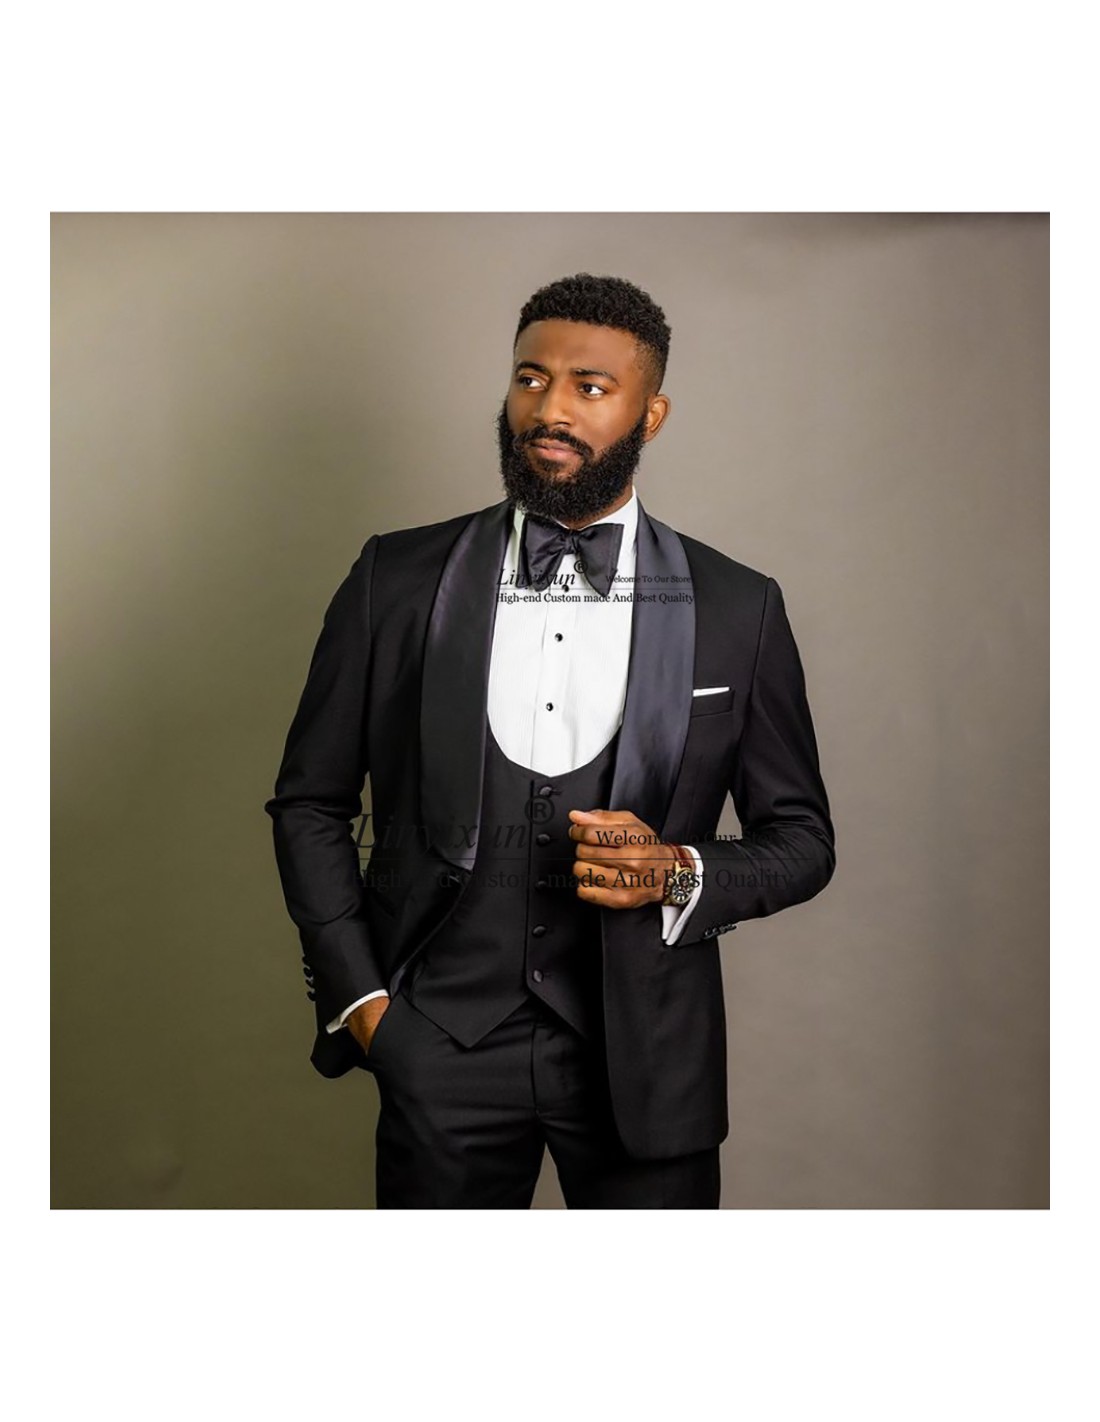 All Loved Shawl Lapel One Button Groom Tuxedos Men Suits Wedding Prom  Dinner Best Man Blazer Black Brothers WeddingJacket+Tie+Girdle+Pants From  Finewedding668, $74.39